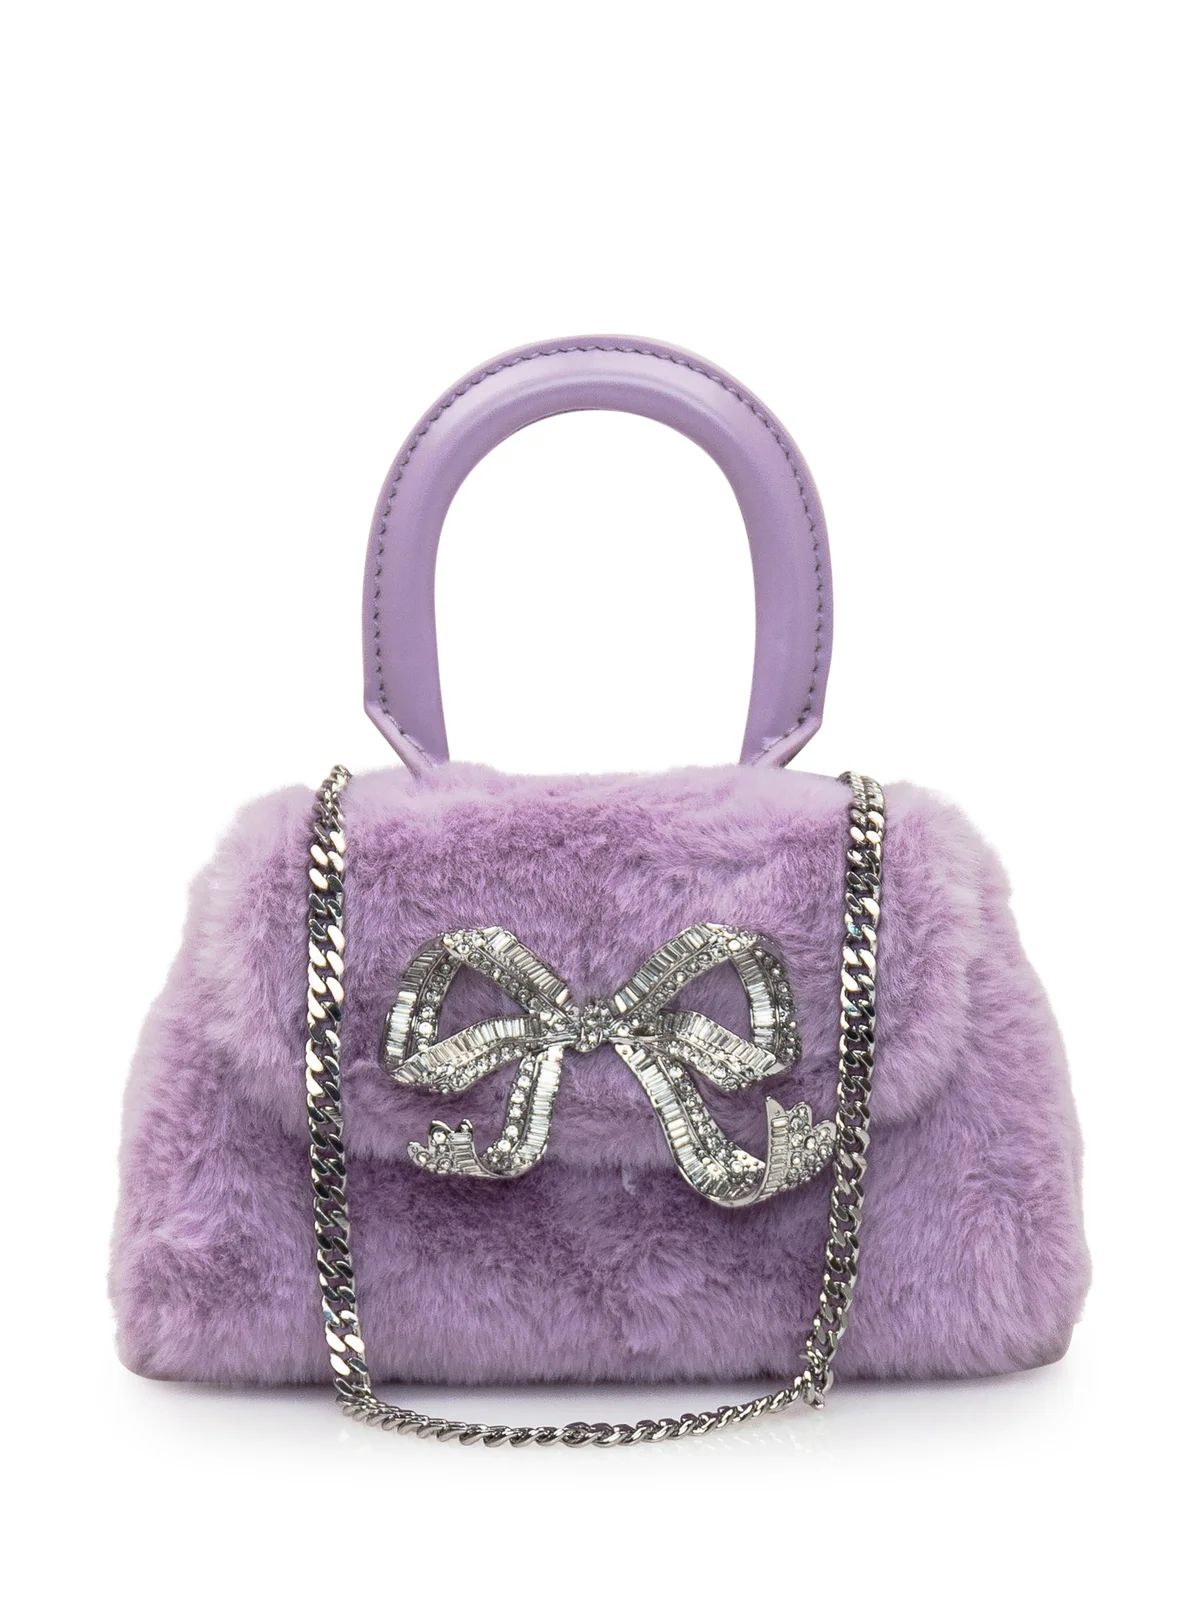 Self-Portrait Fluffy Bow Embellished Micro Tote Bag | Cettire Global